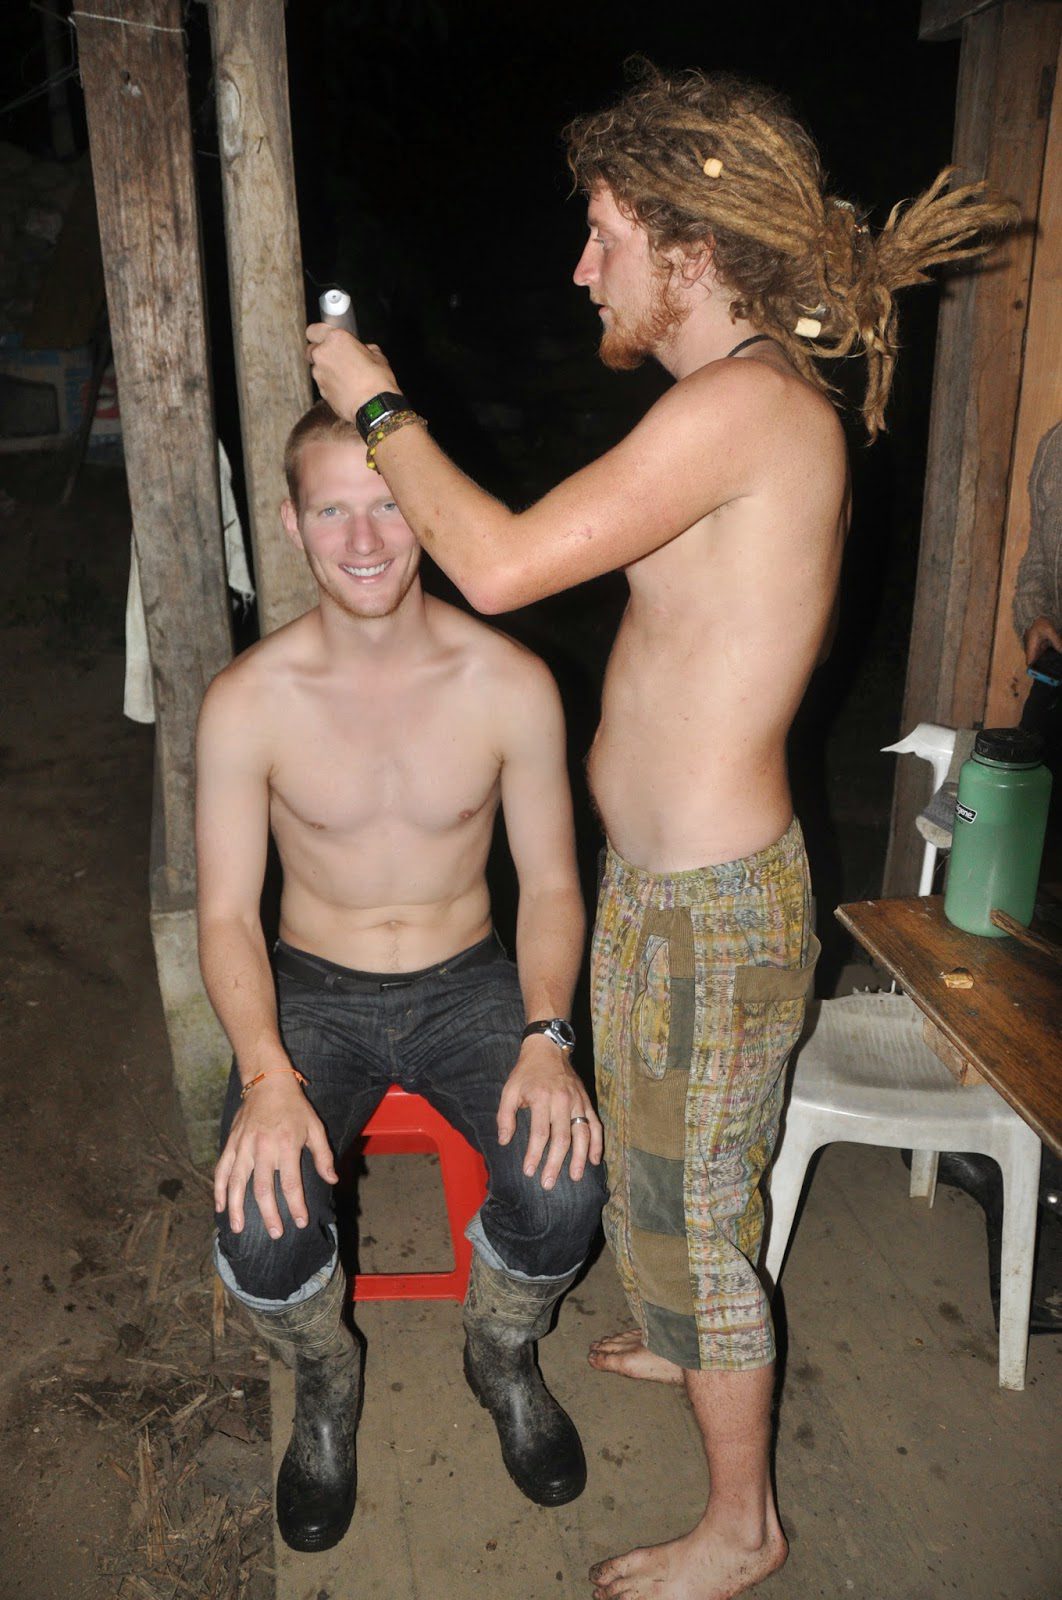 Oh, and on our last night, Nick shaved off the rest of Ben's Mohawk. He looks pretty happy about it!